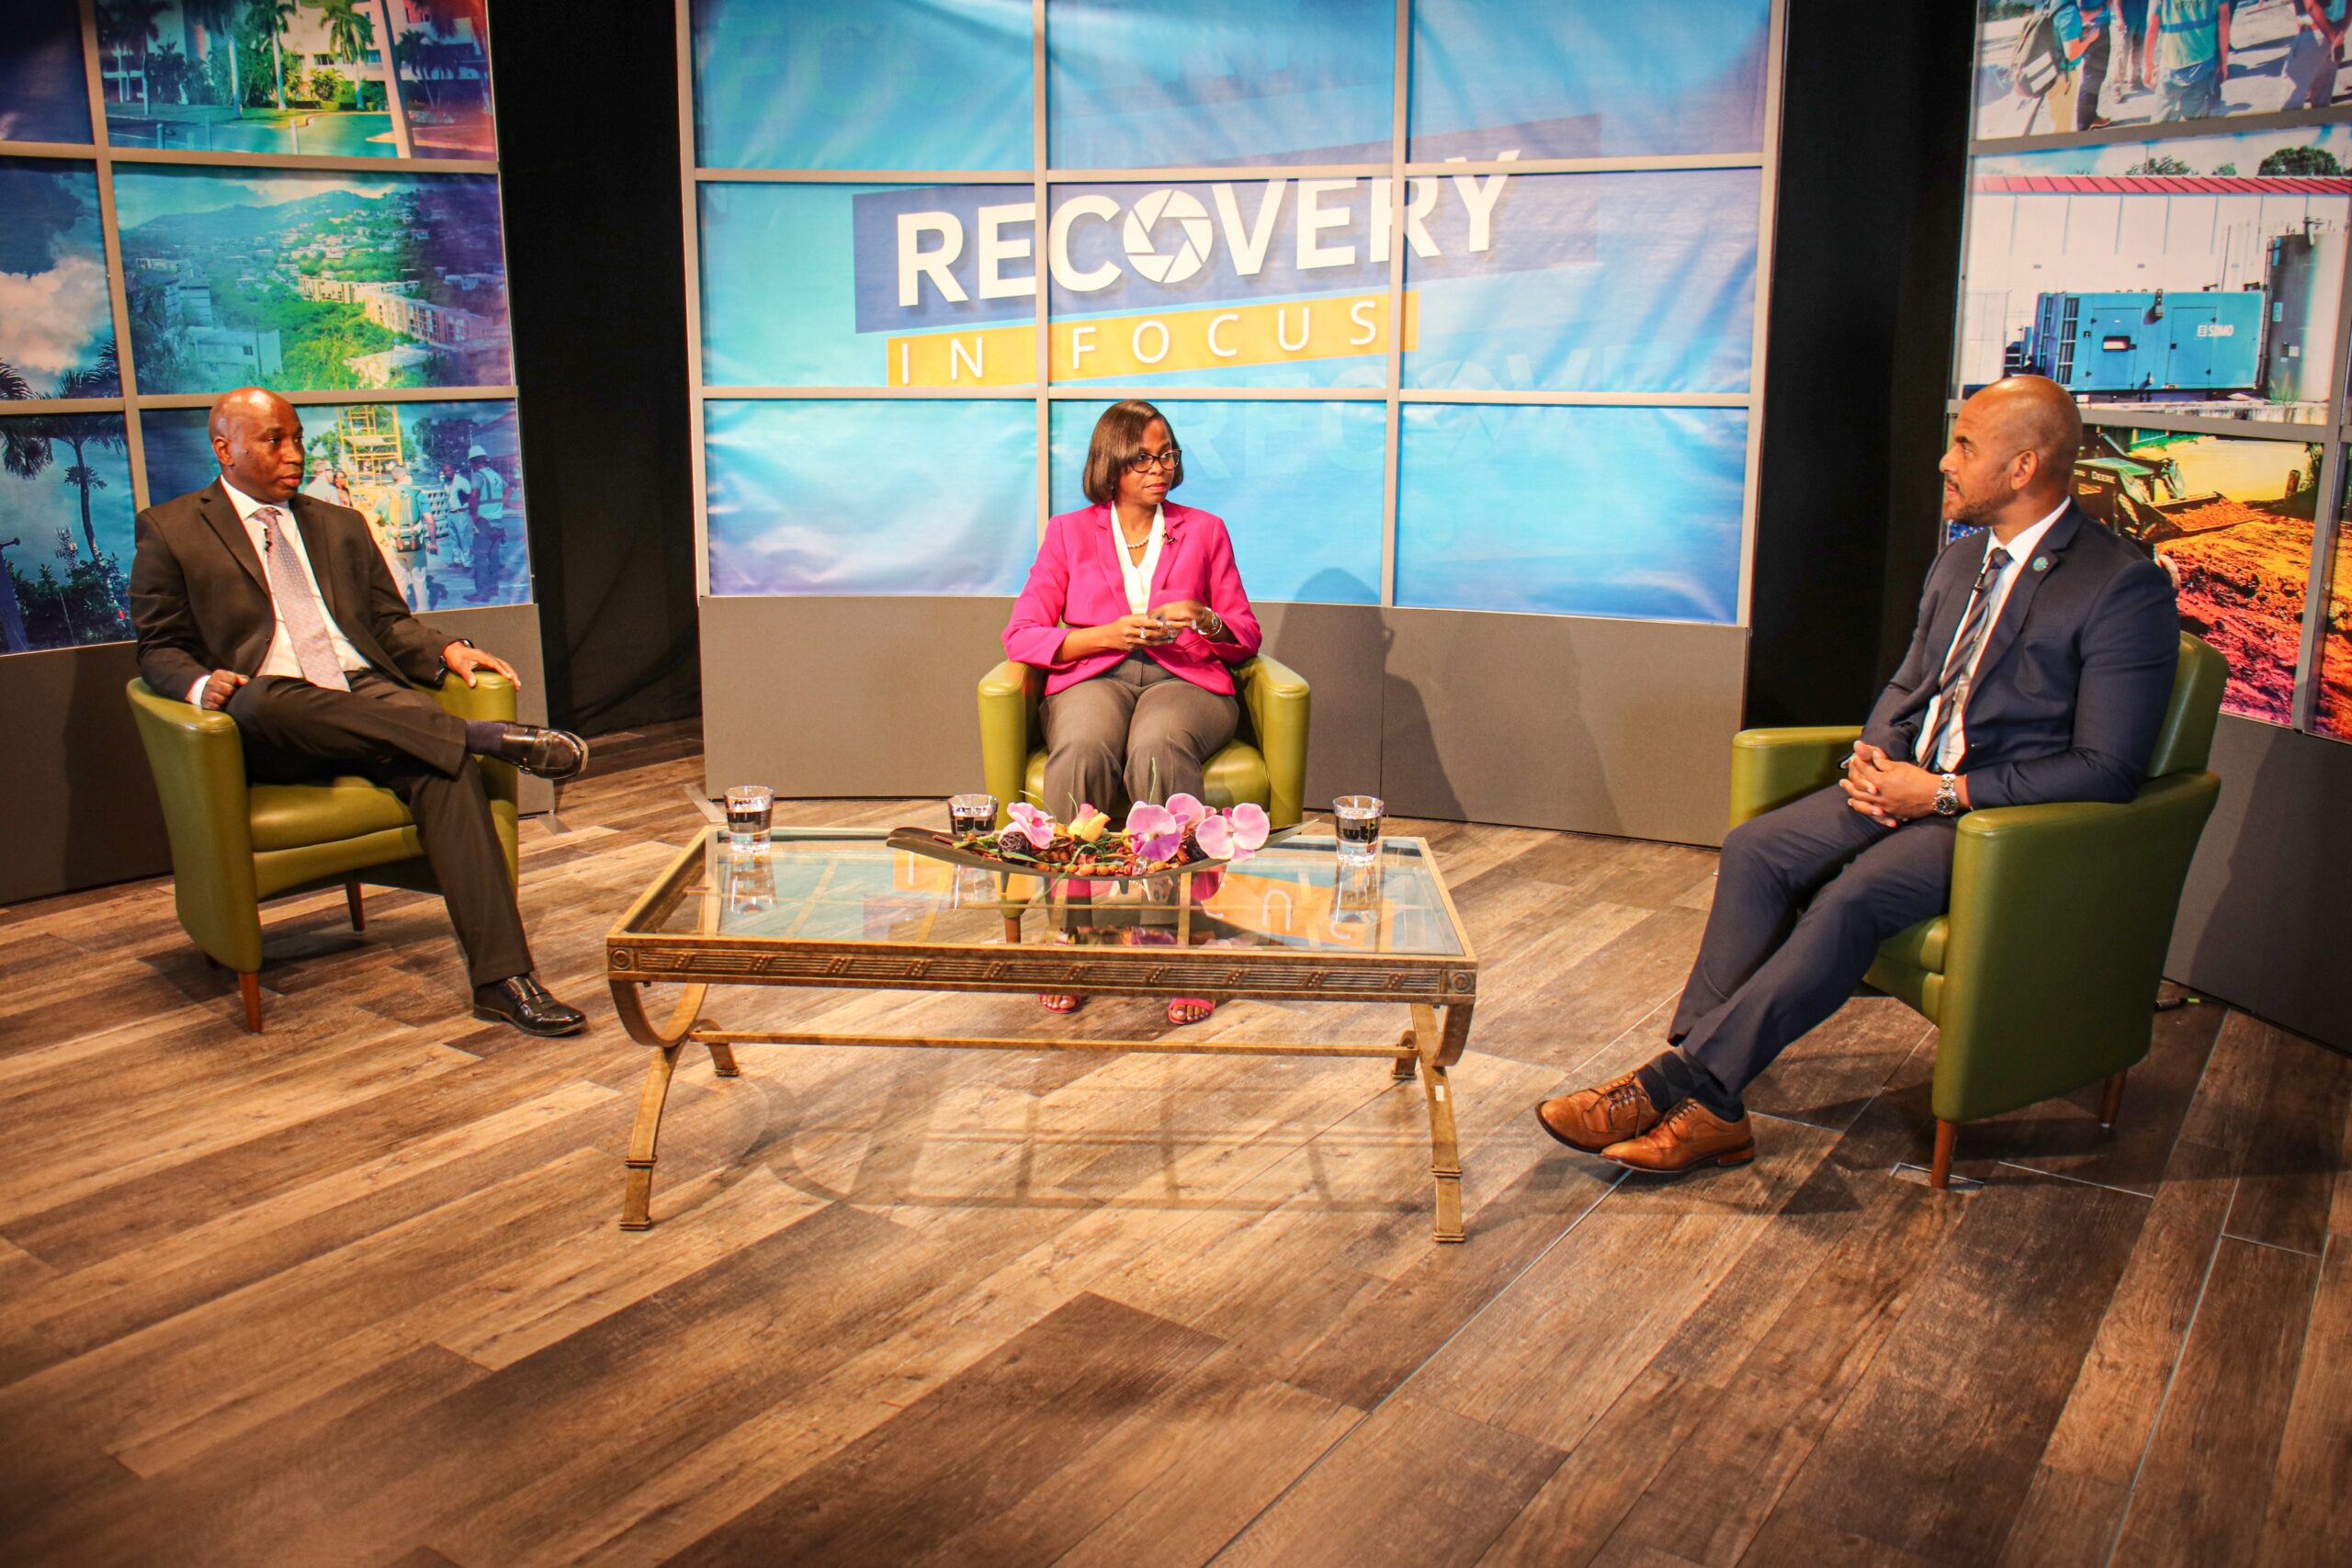 June Episode of Recovery in Focus Showcased Territorial Housing and Road Projects